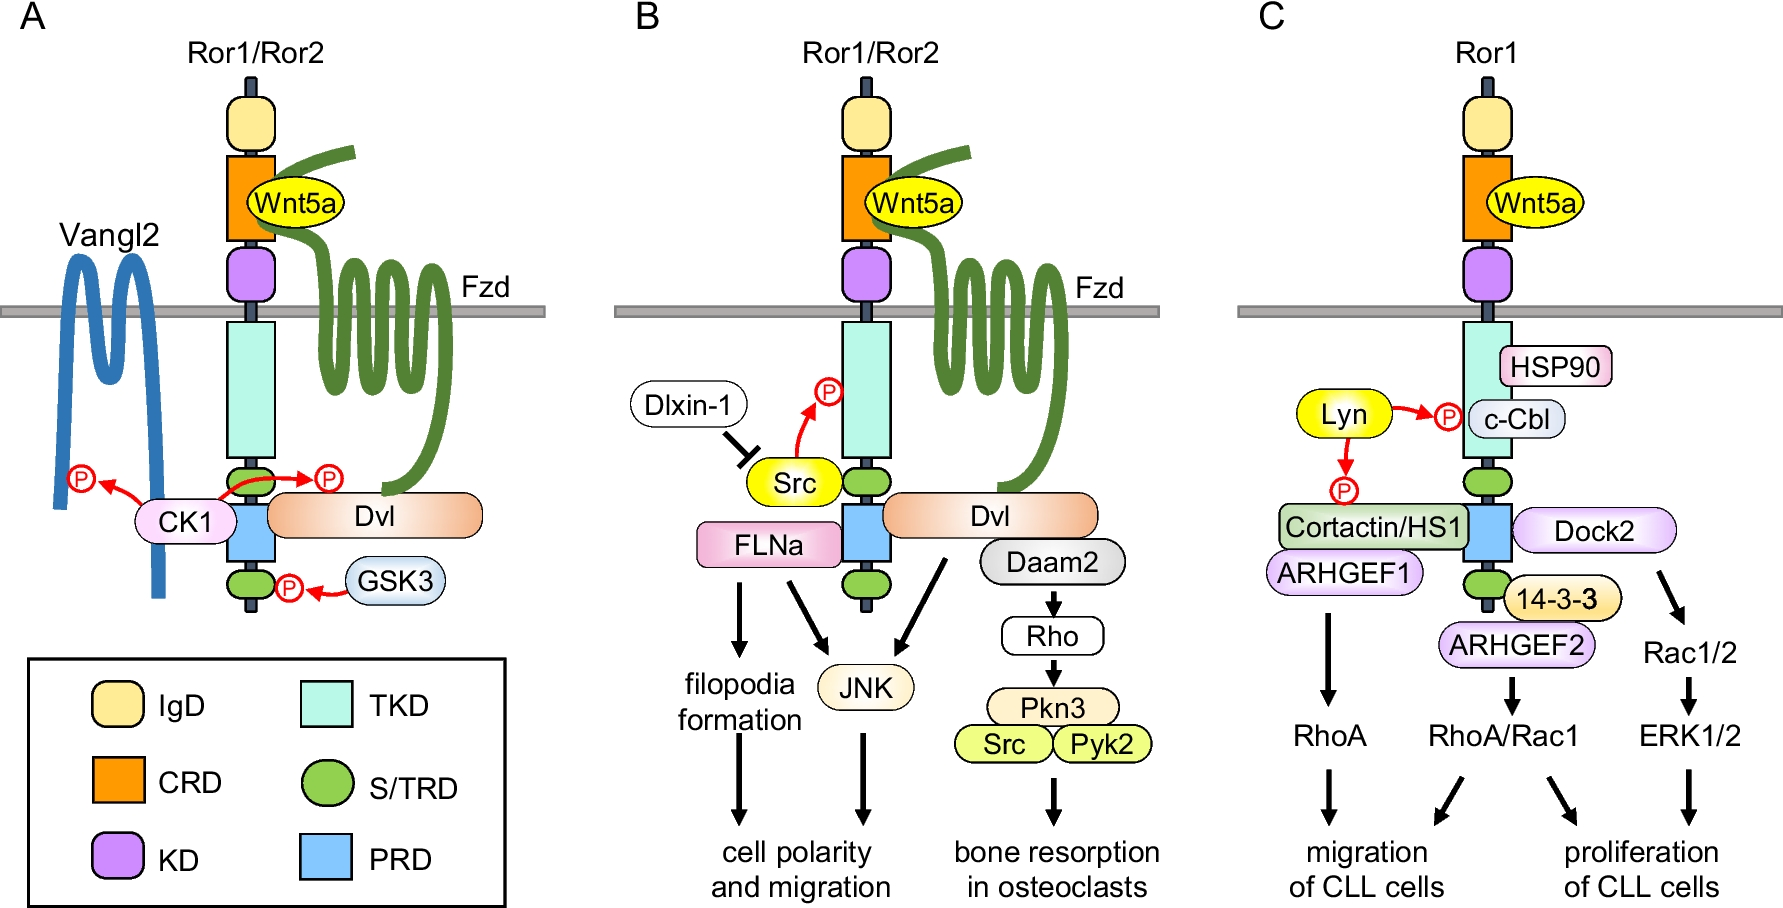 Role of the Ror family receptors in Wnt5a signaling